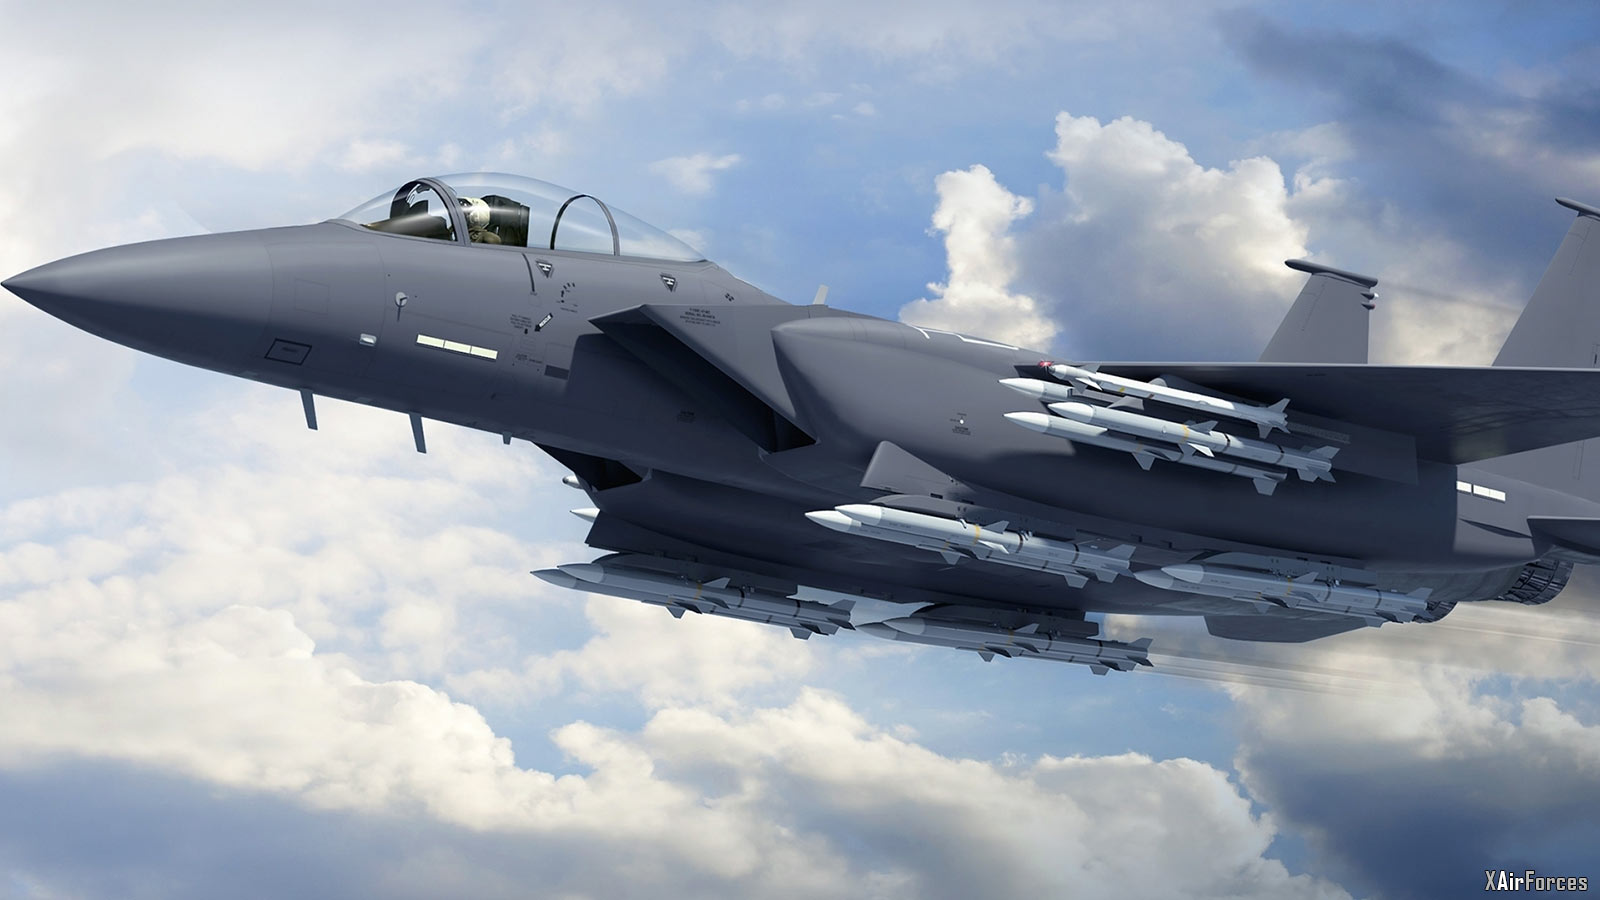 The US Air Force Boeing F-15 Strike Eagle